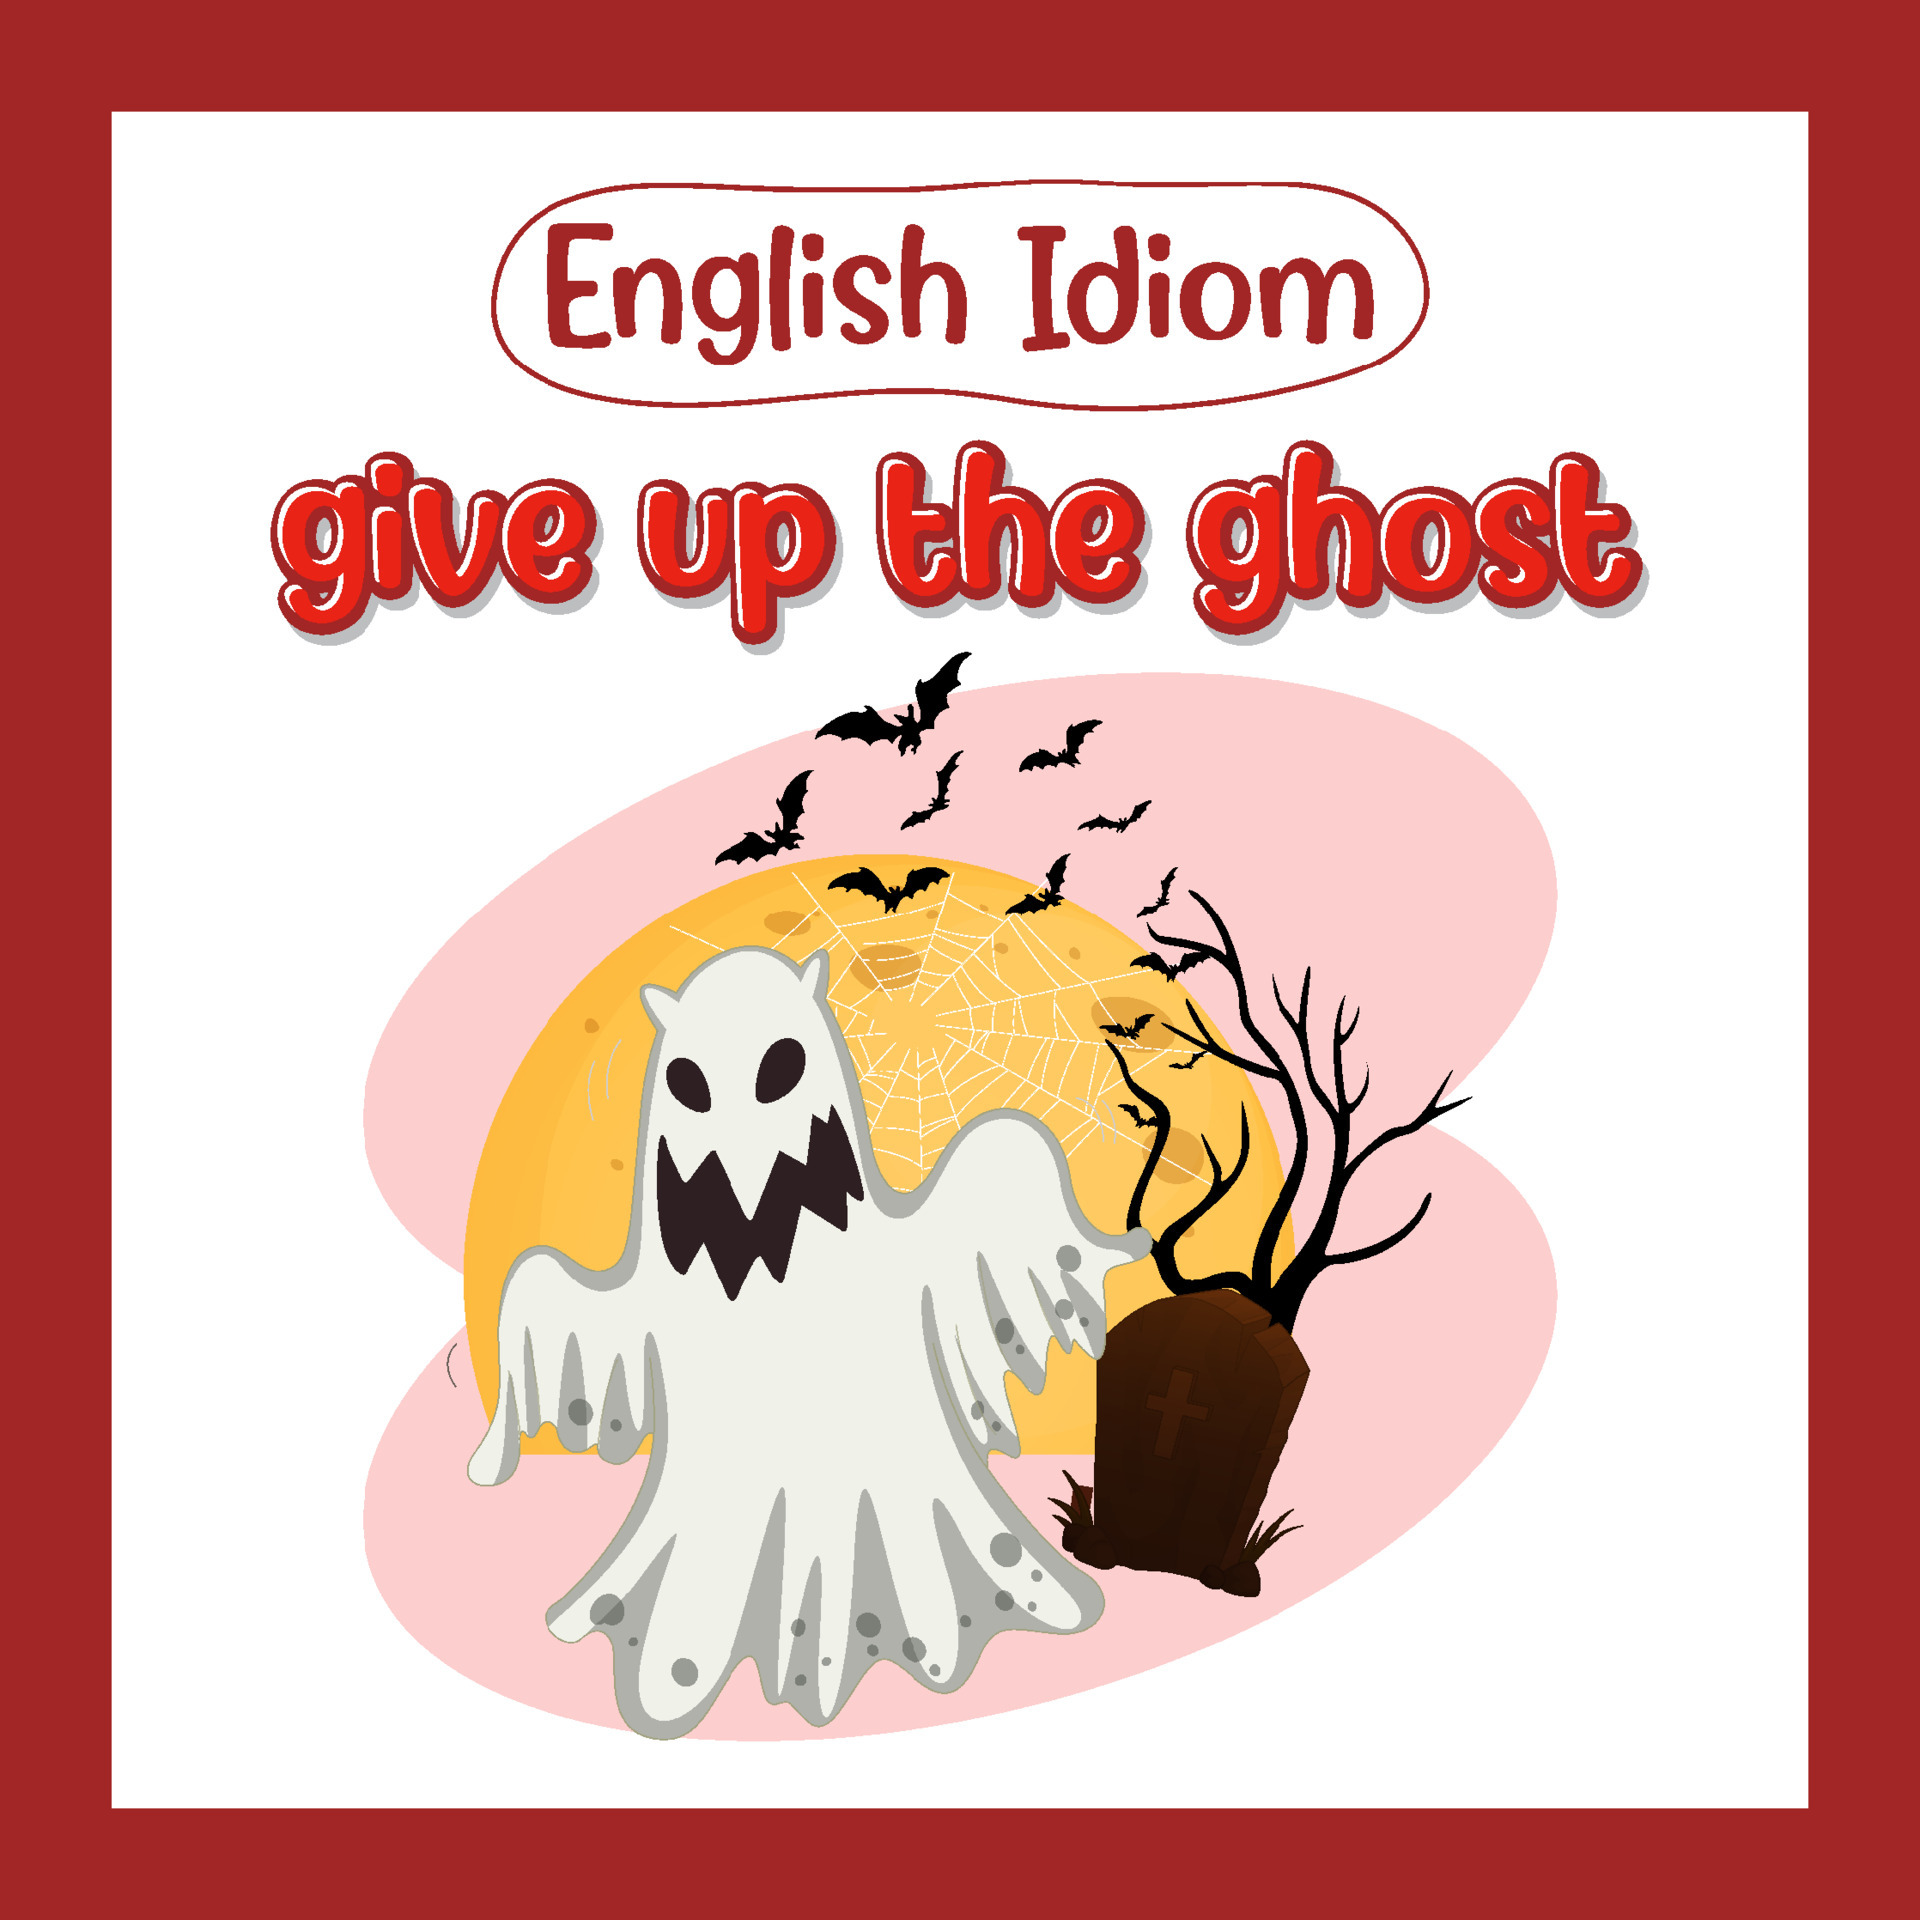 what is the meaning of give up the ghost